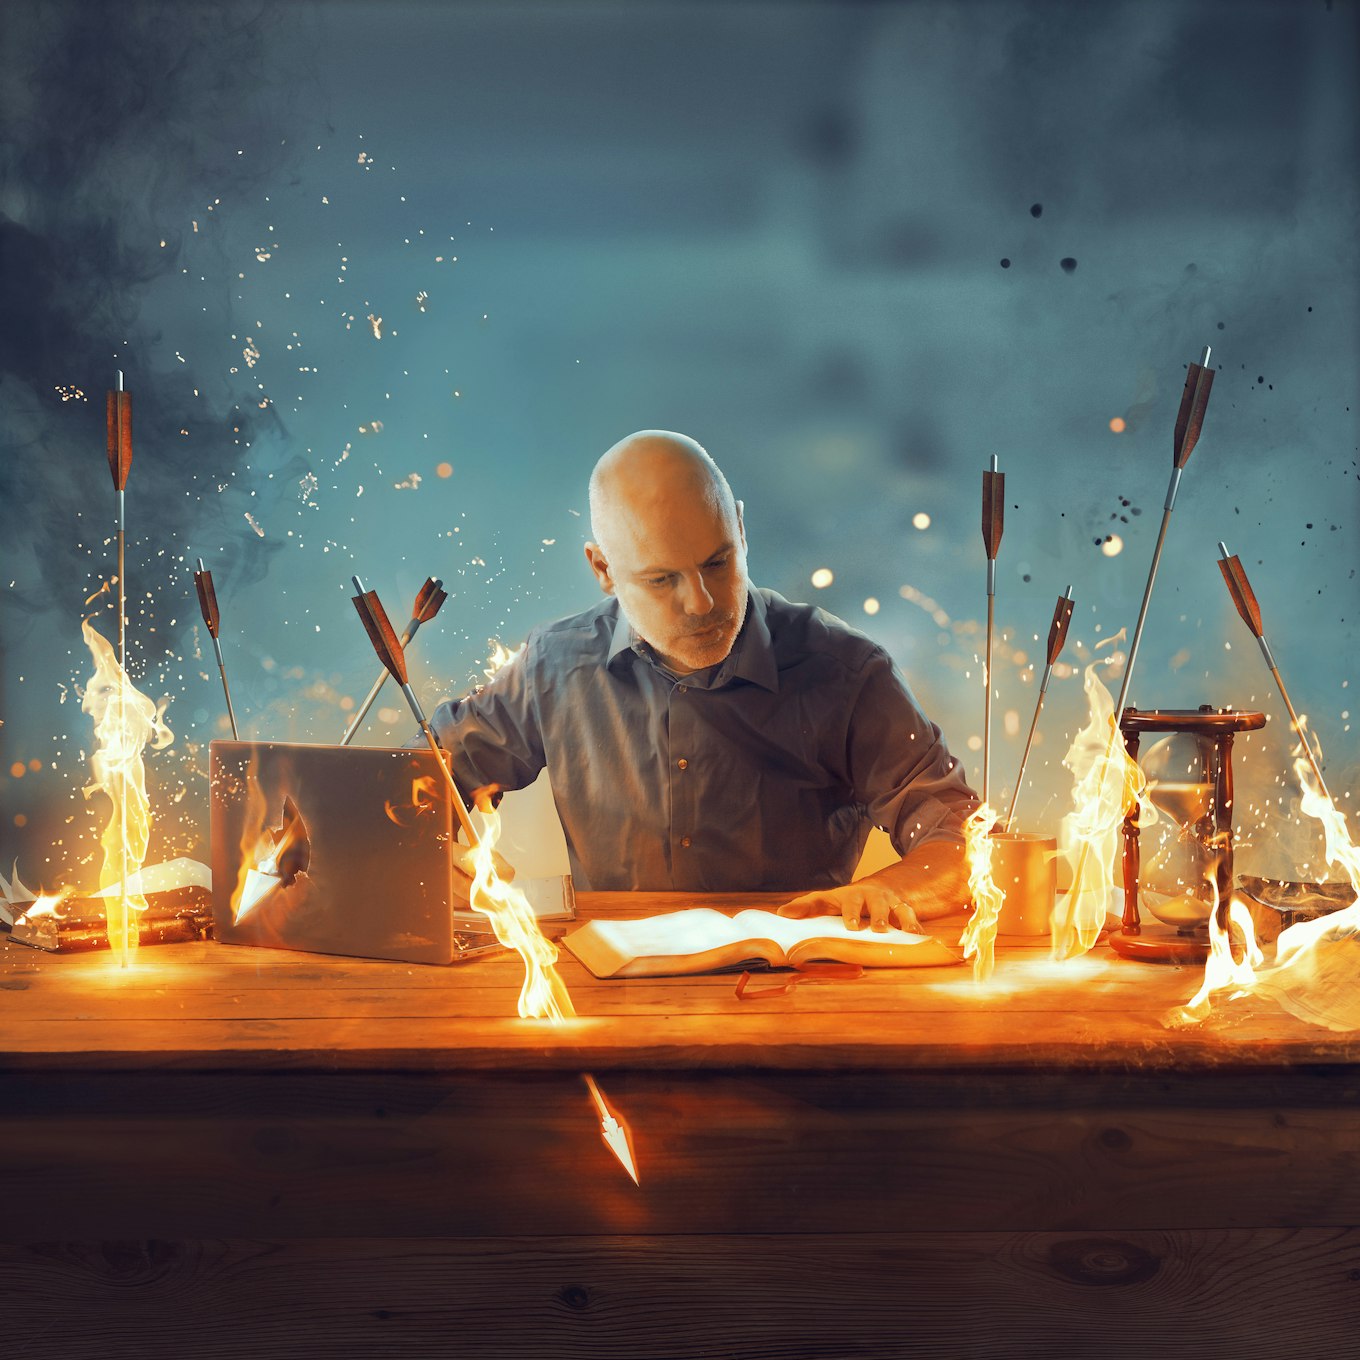 Man reading, with flaming arrows hitting desk around him.